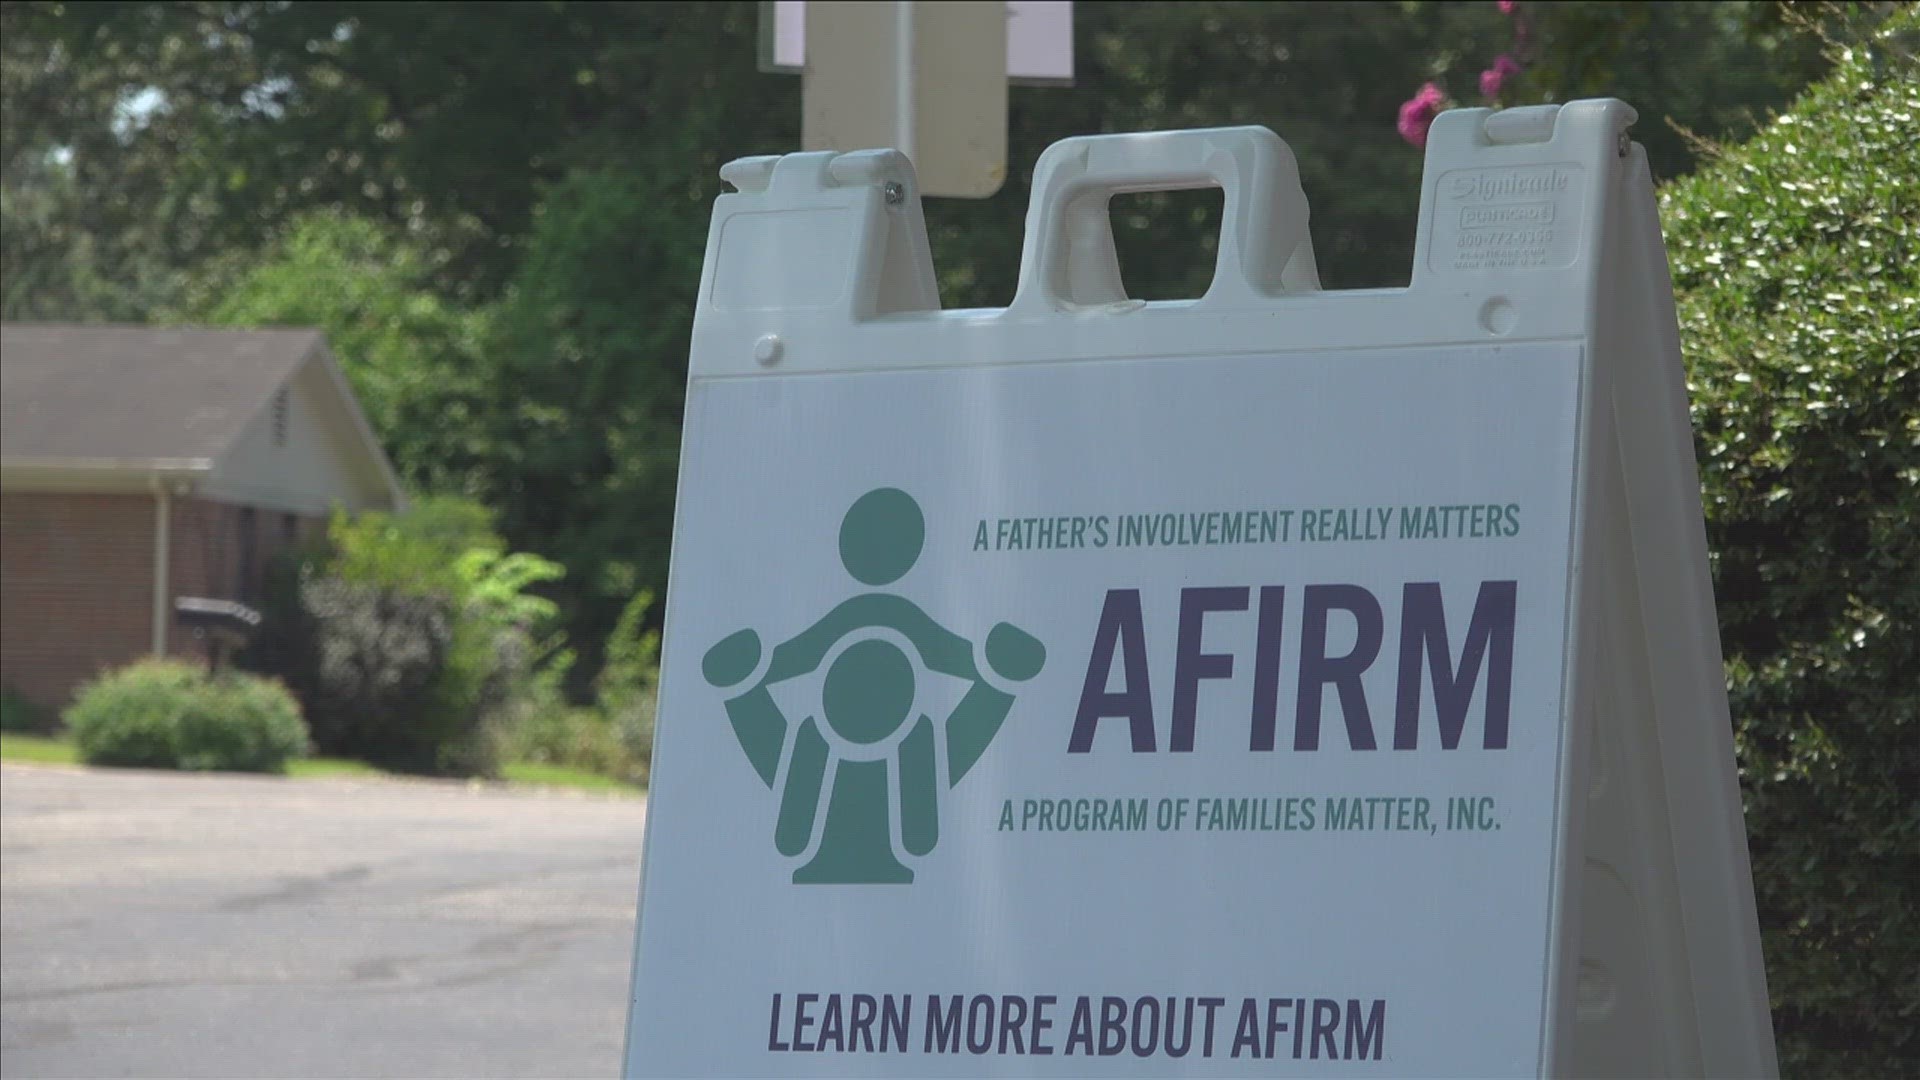 Local non-profit Families Matter Inc. has partnered with the Shelby County Juvenile Court to help low-income fathers to help change that through a new program.